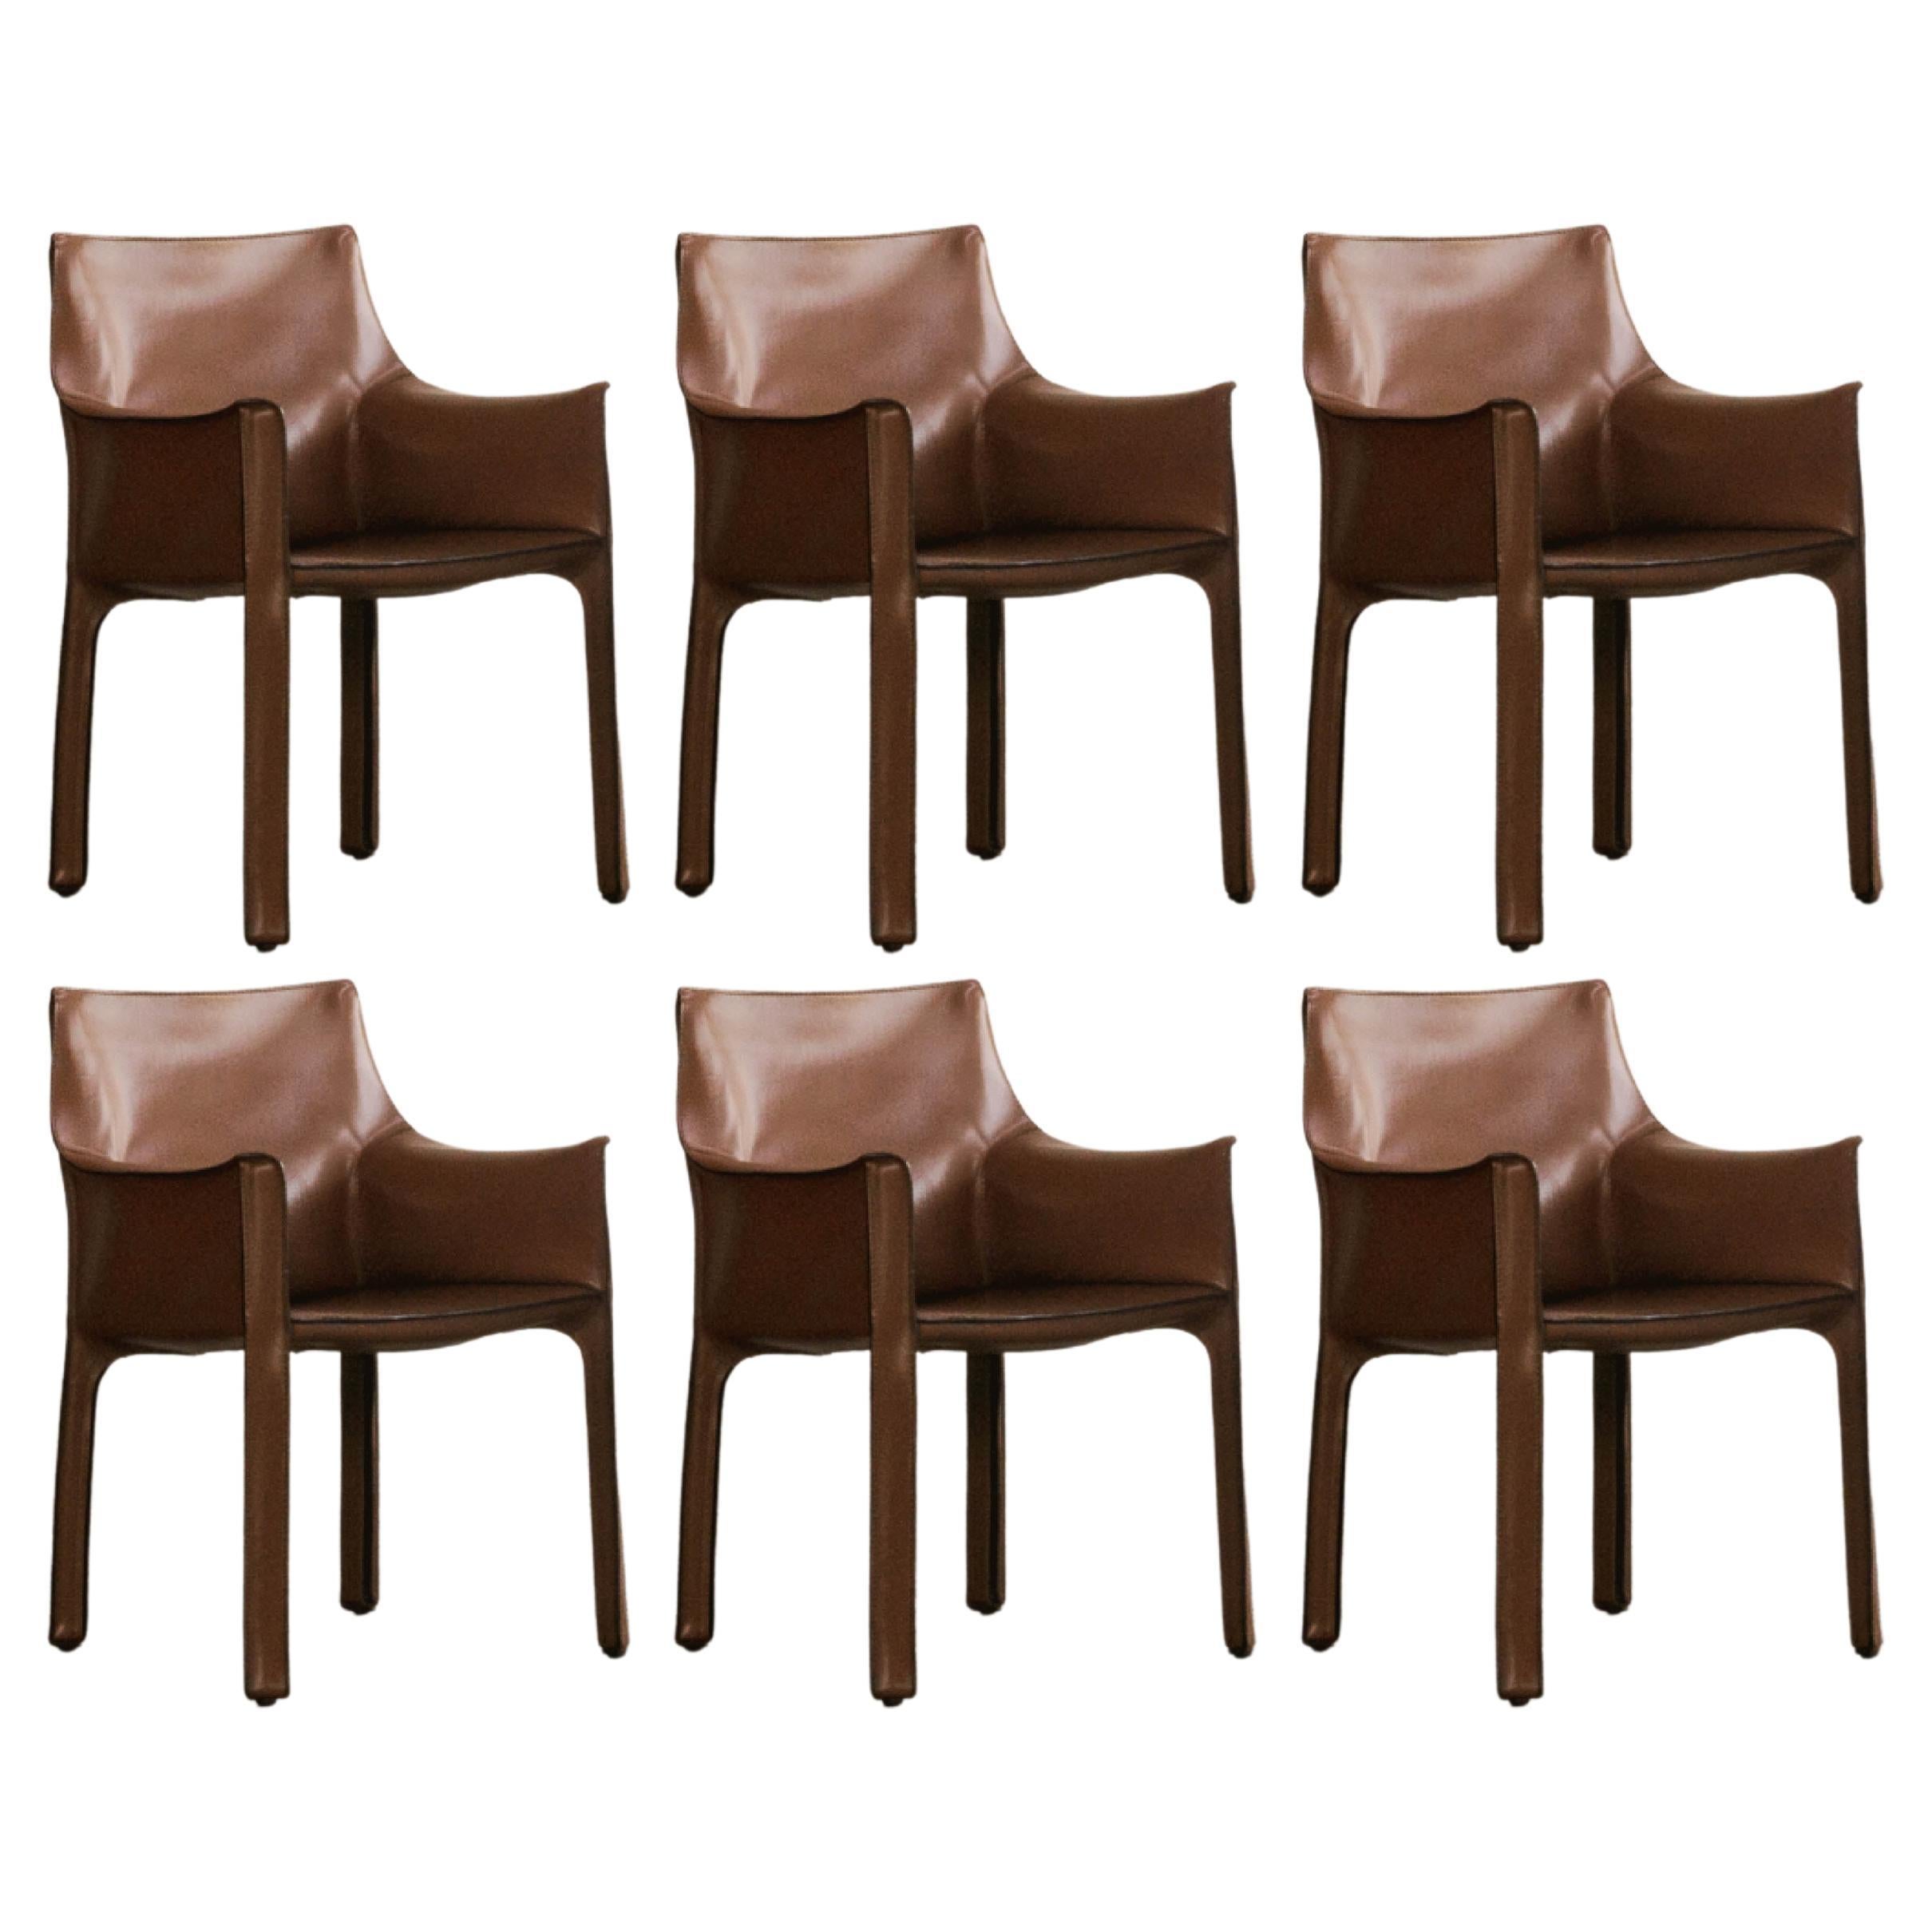 Mario Bellini 413 "CAB" Chairs for Cassina, 1977, Set of 6